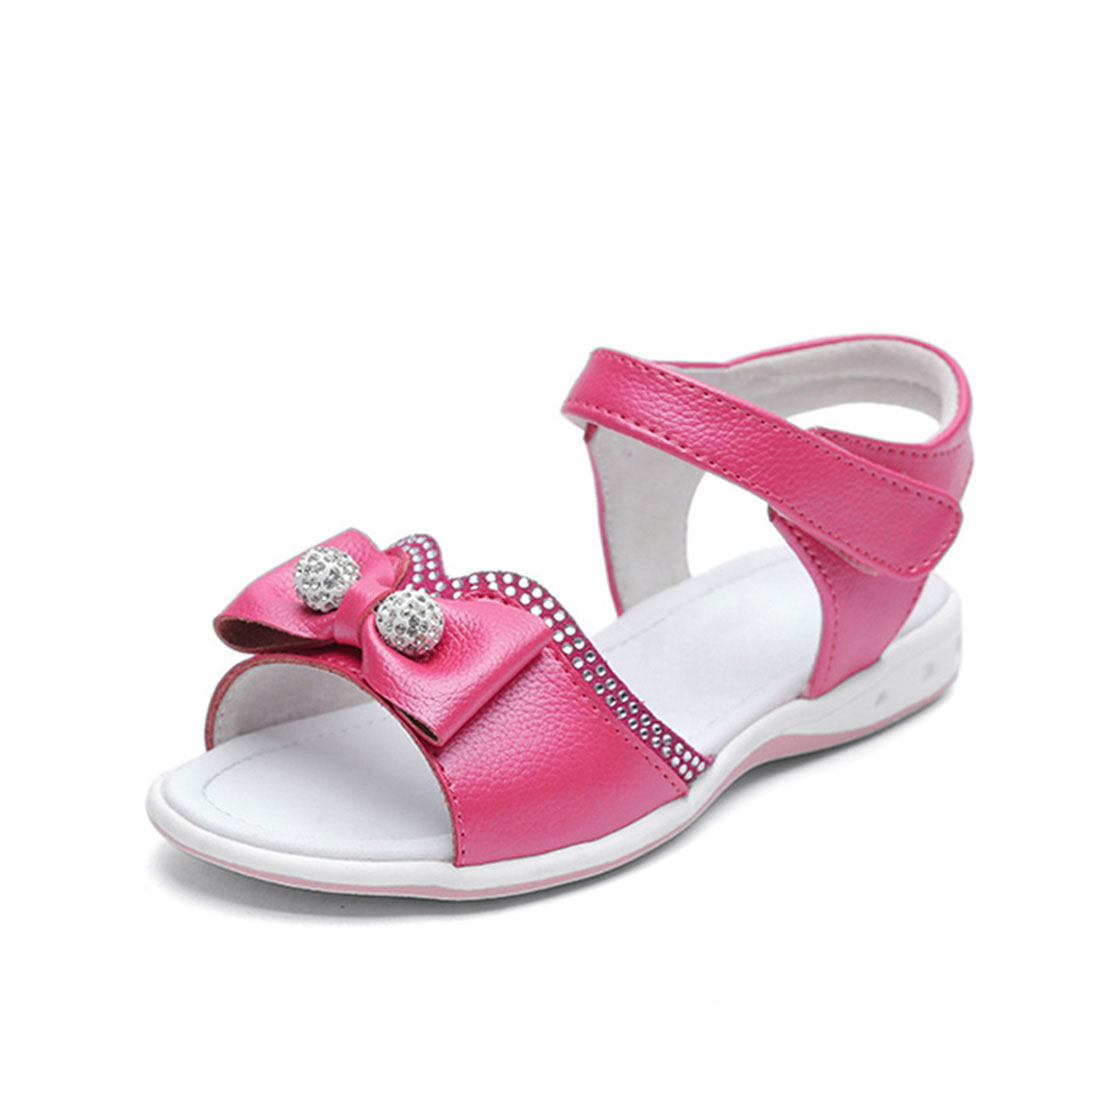 Real leather fuchsia flat fashion 2018 summer with diamante and bow kids sandals